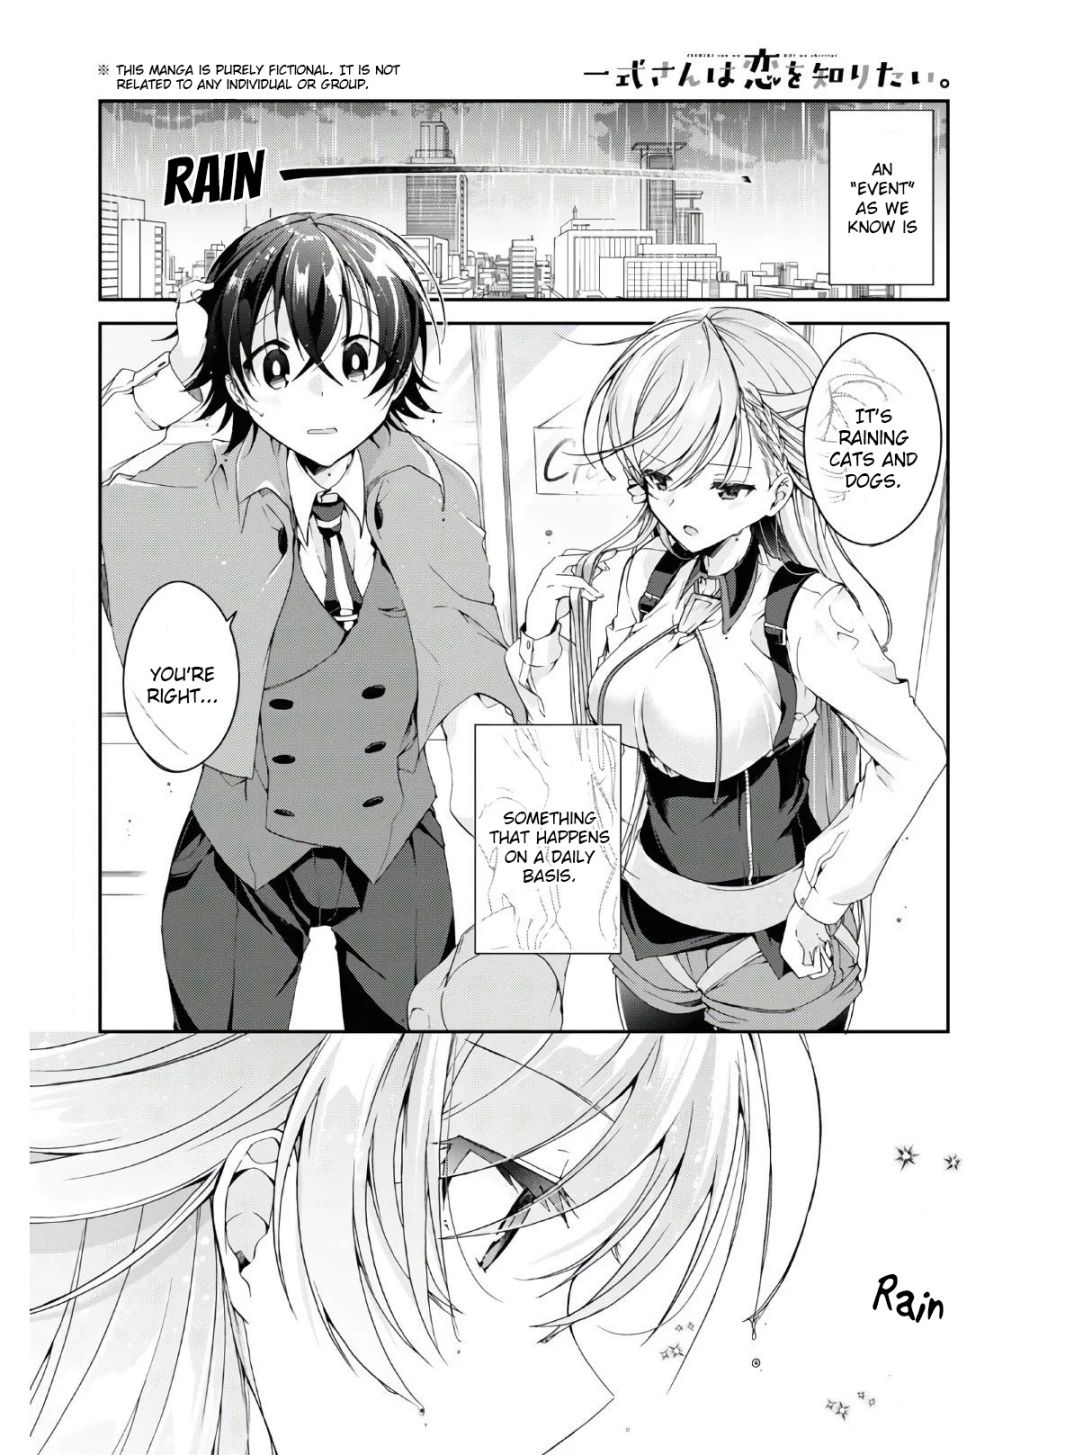 Isshiki-san Wants to Know About Love. - chapter 11.5 - #2